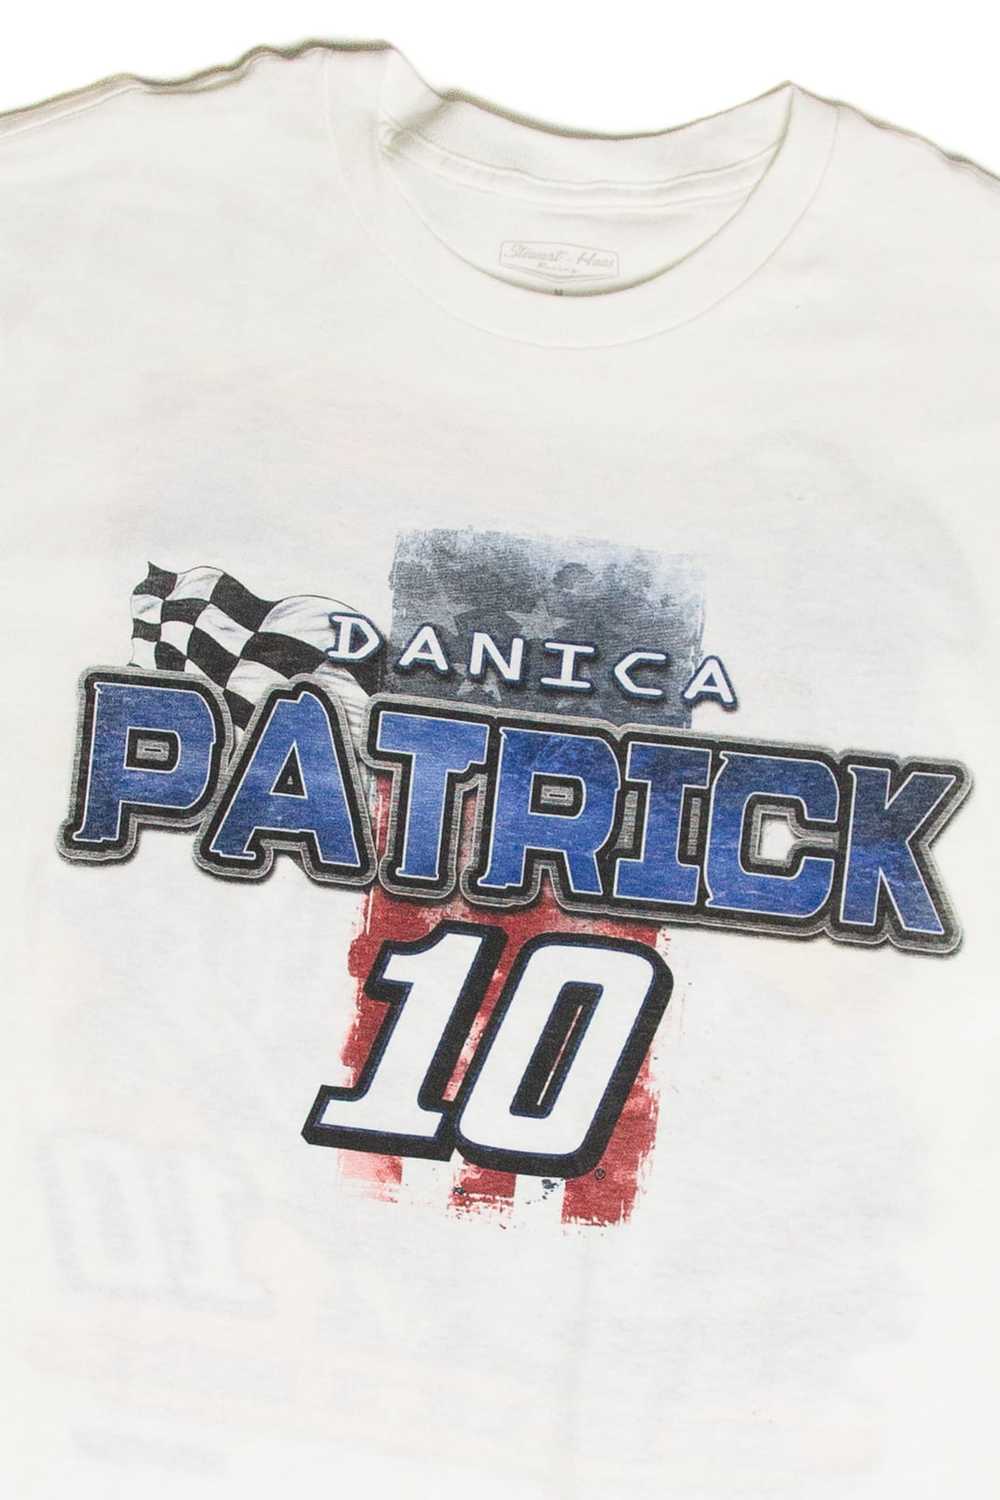 Recycled Danica Patrick T-Shirt (2017) - image 3